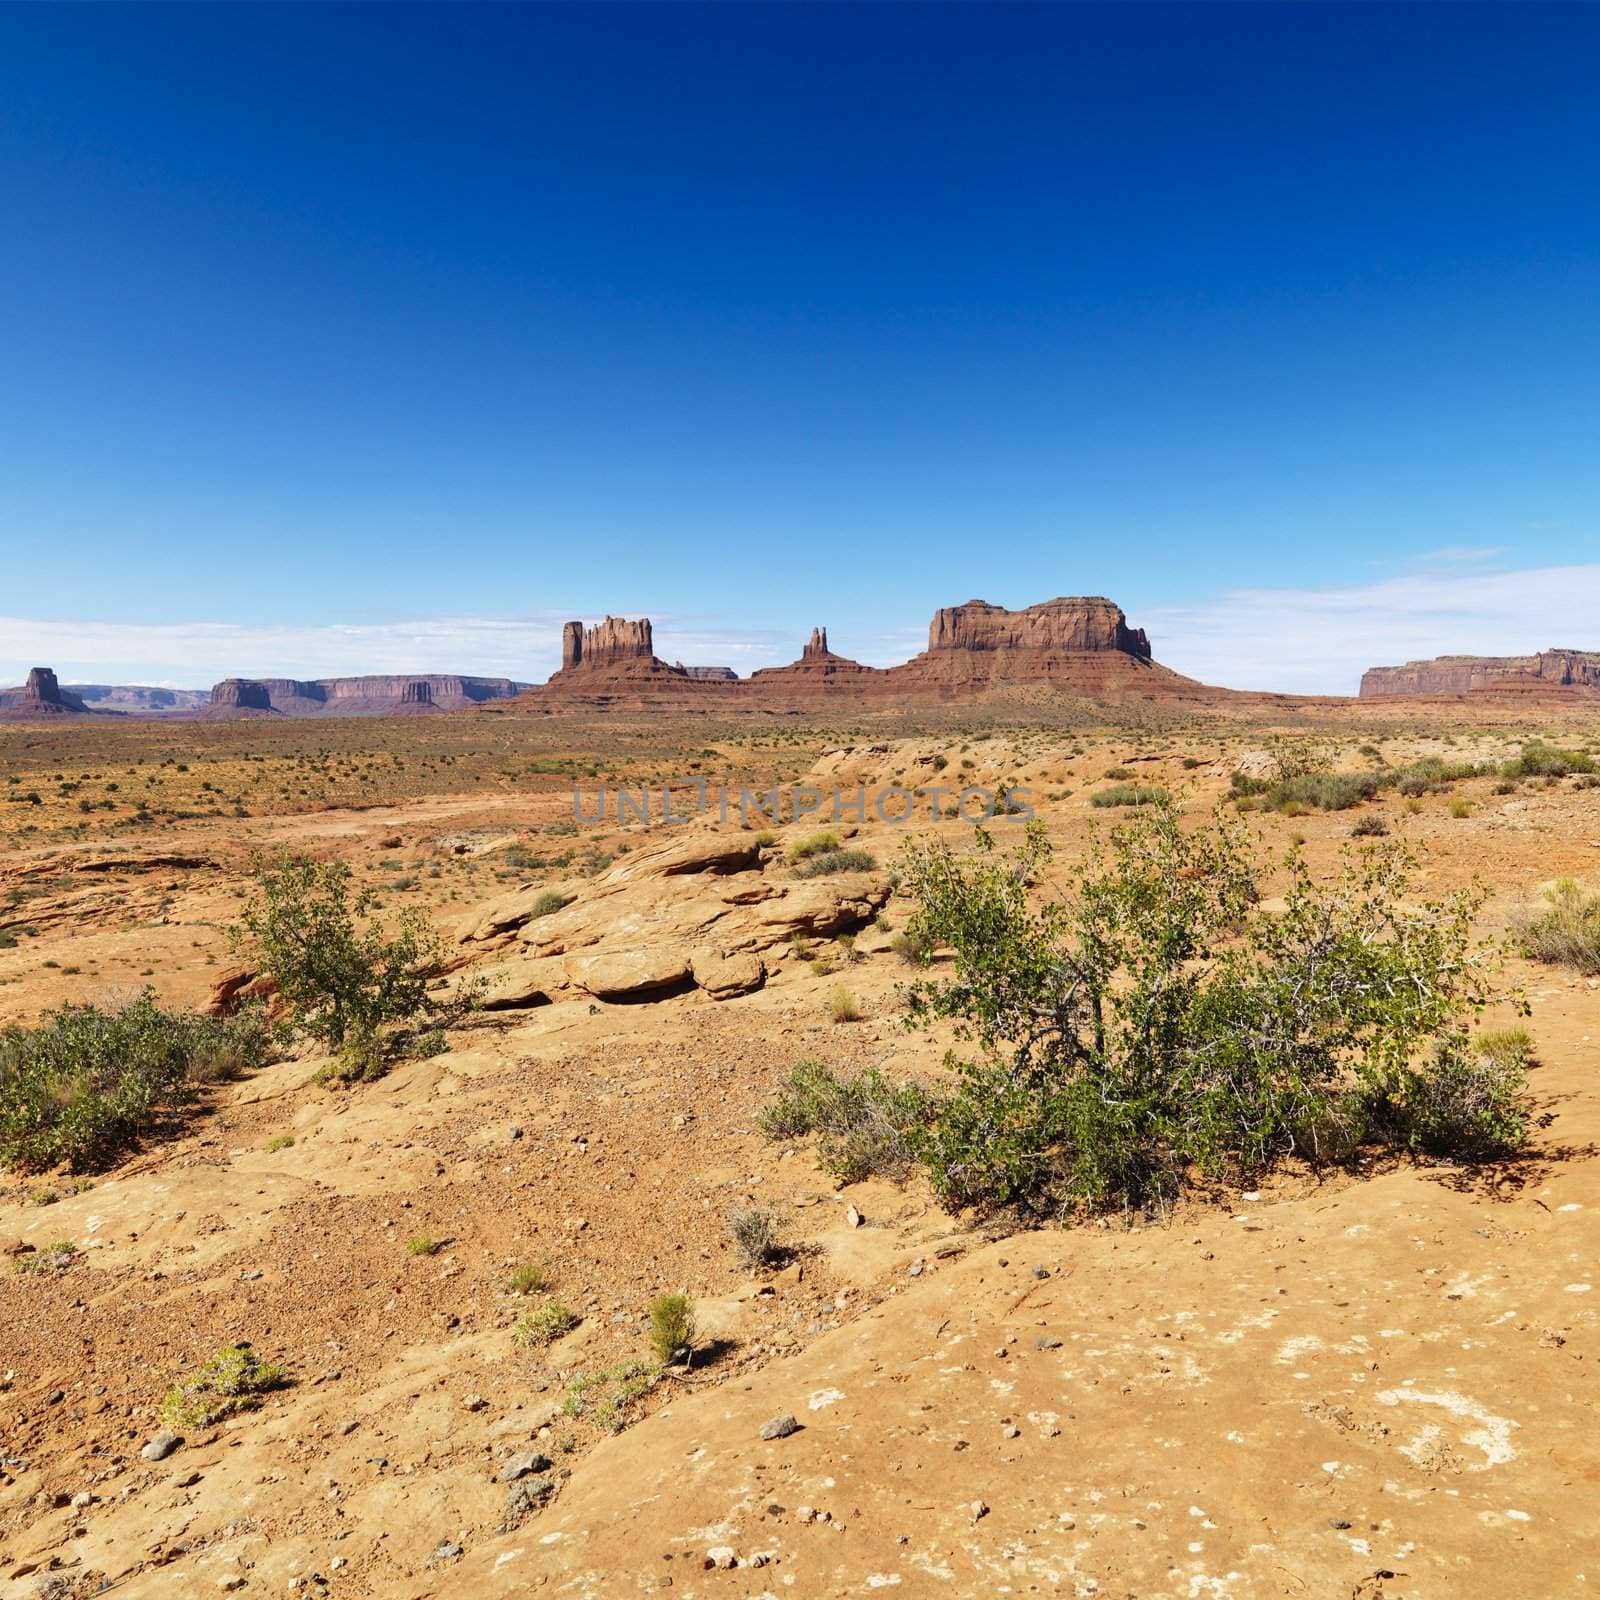 Scenic desert landscape with mountains and foliage.